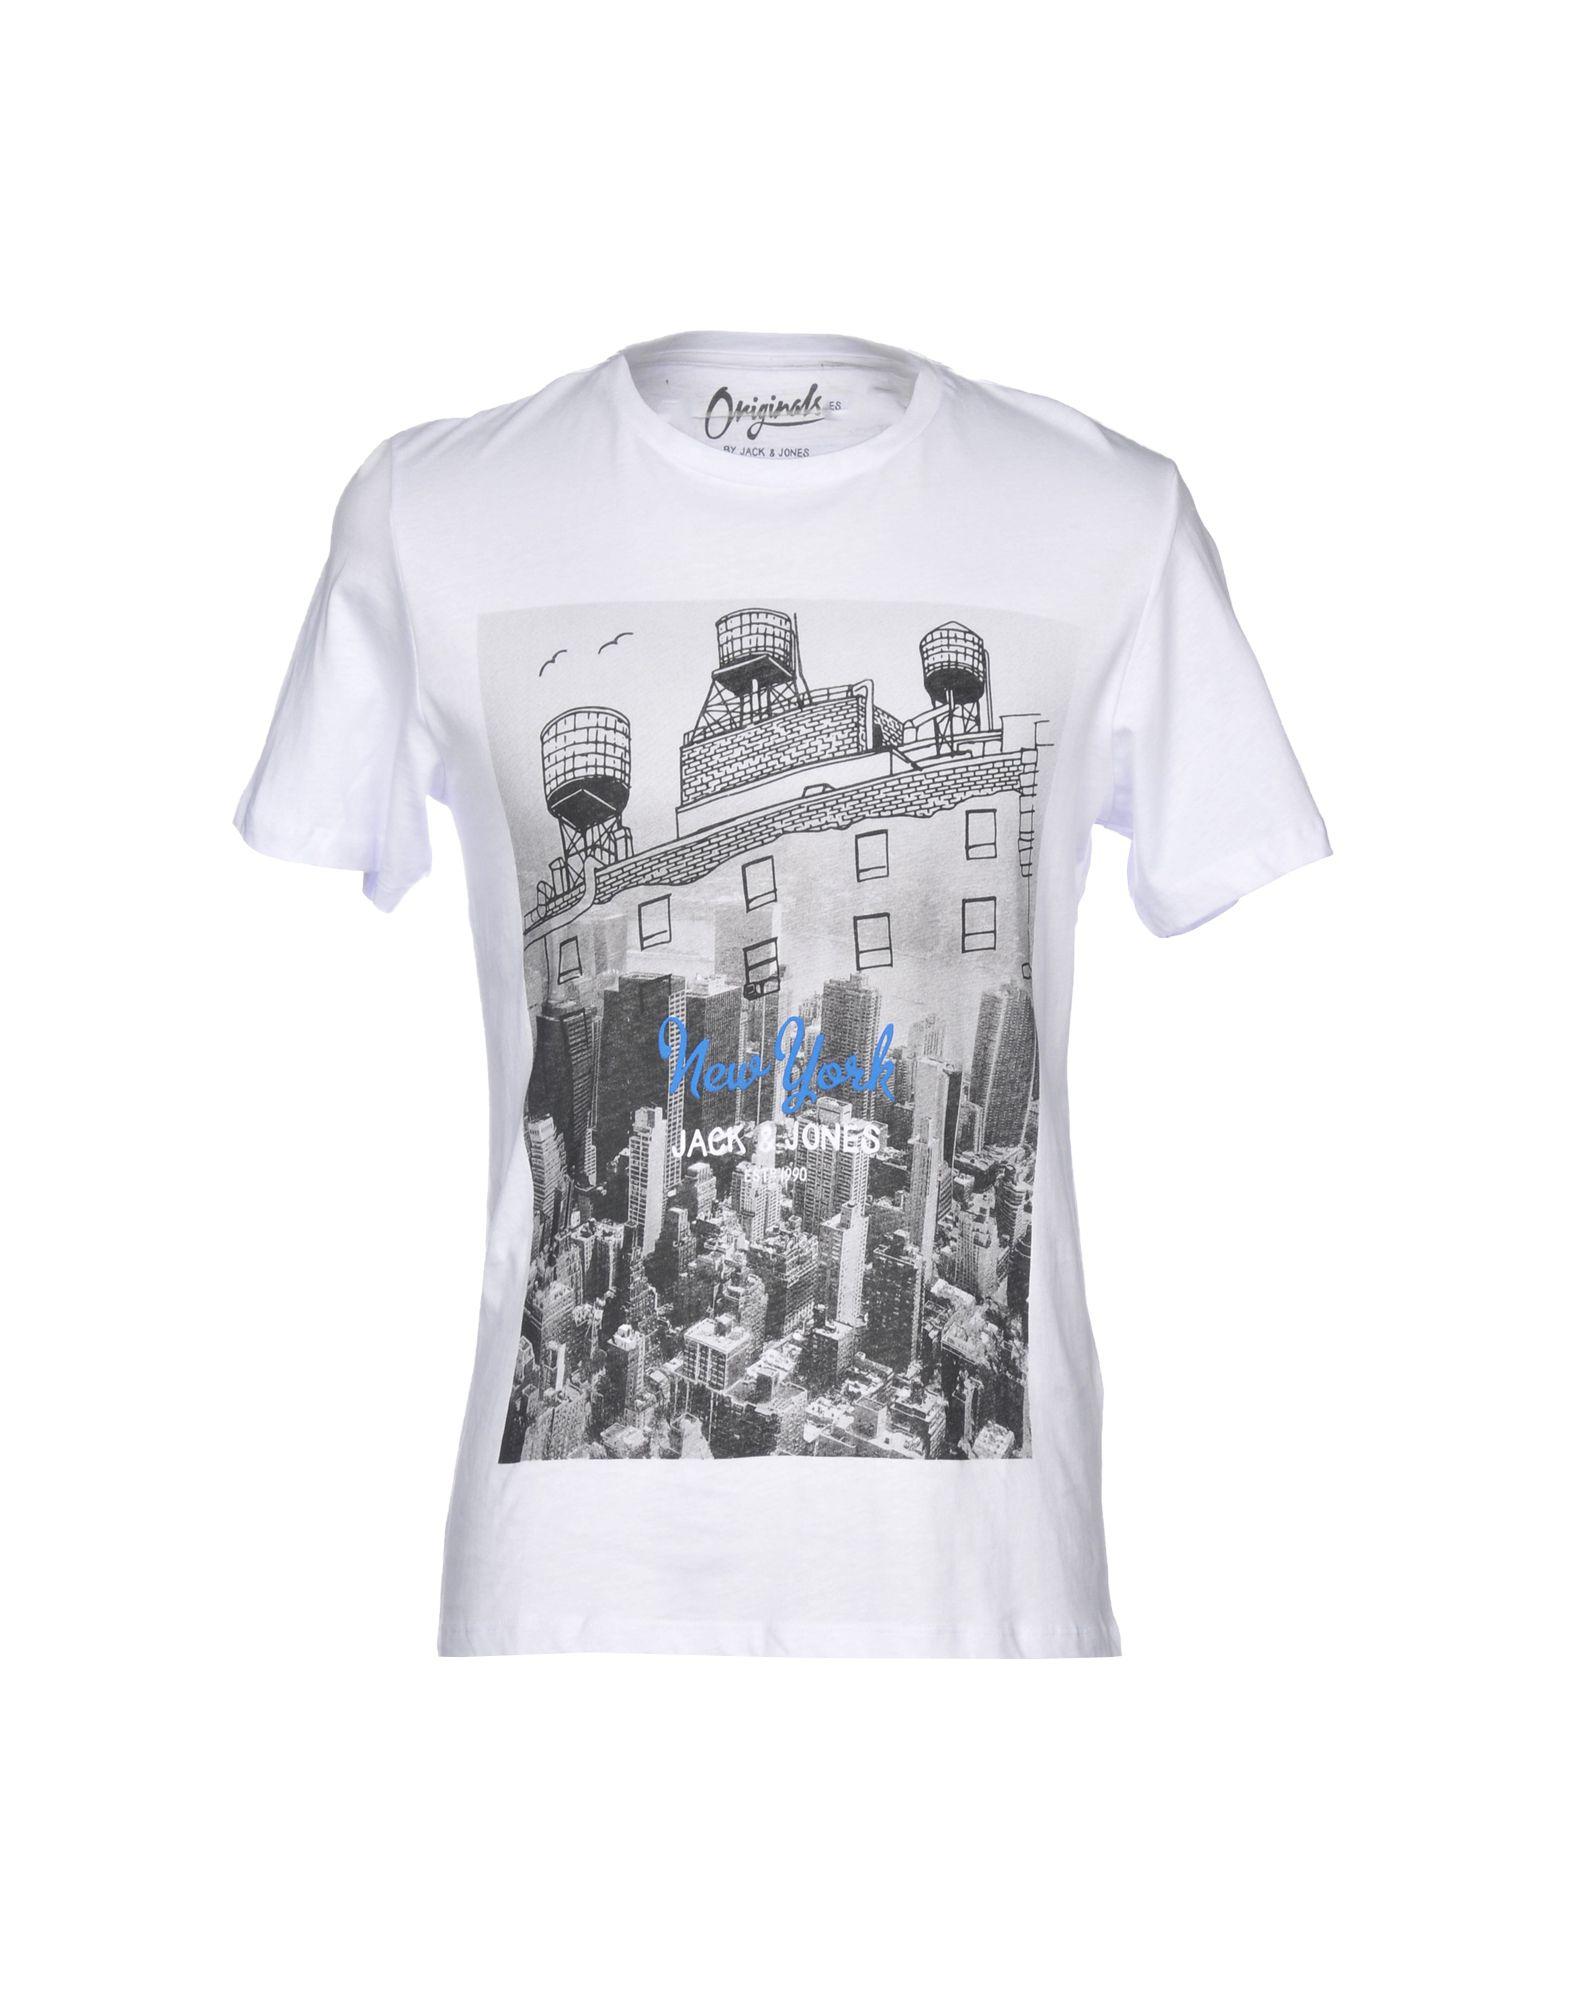 Originals By Jack & Jones T-shirts in White for Men - Lyst